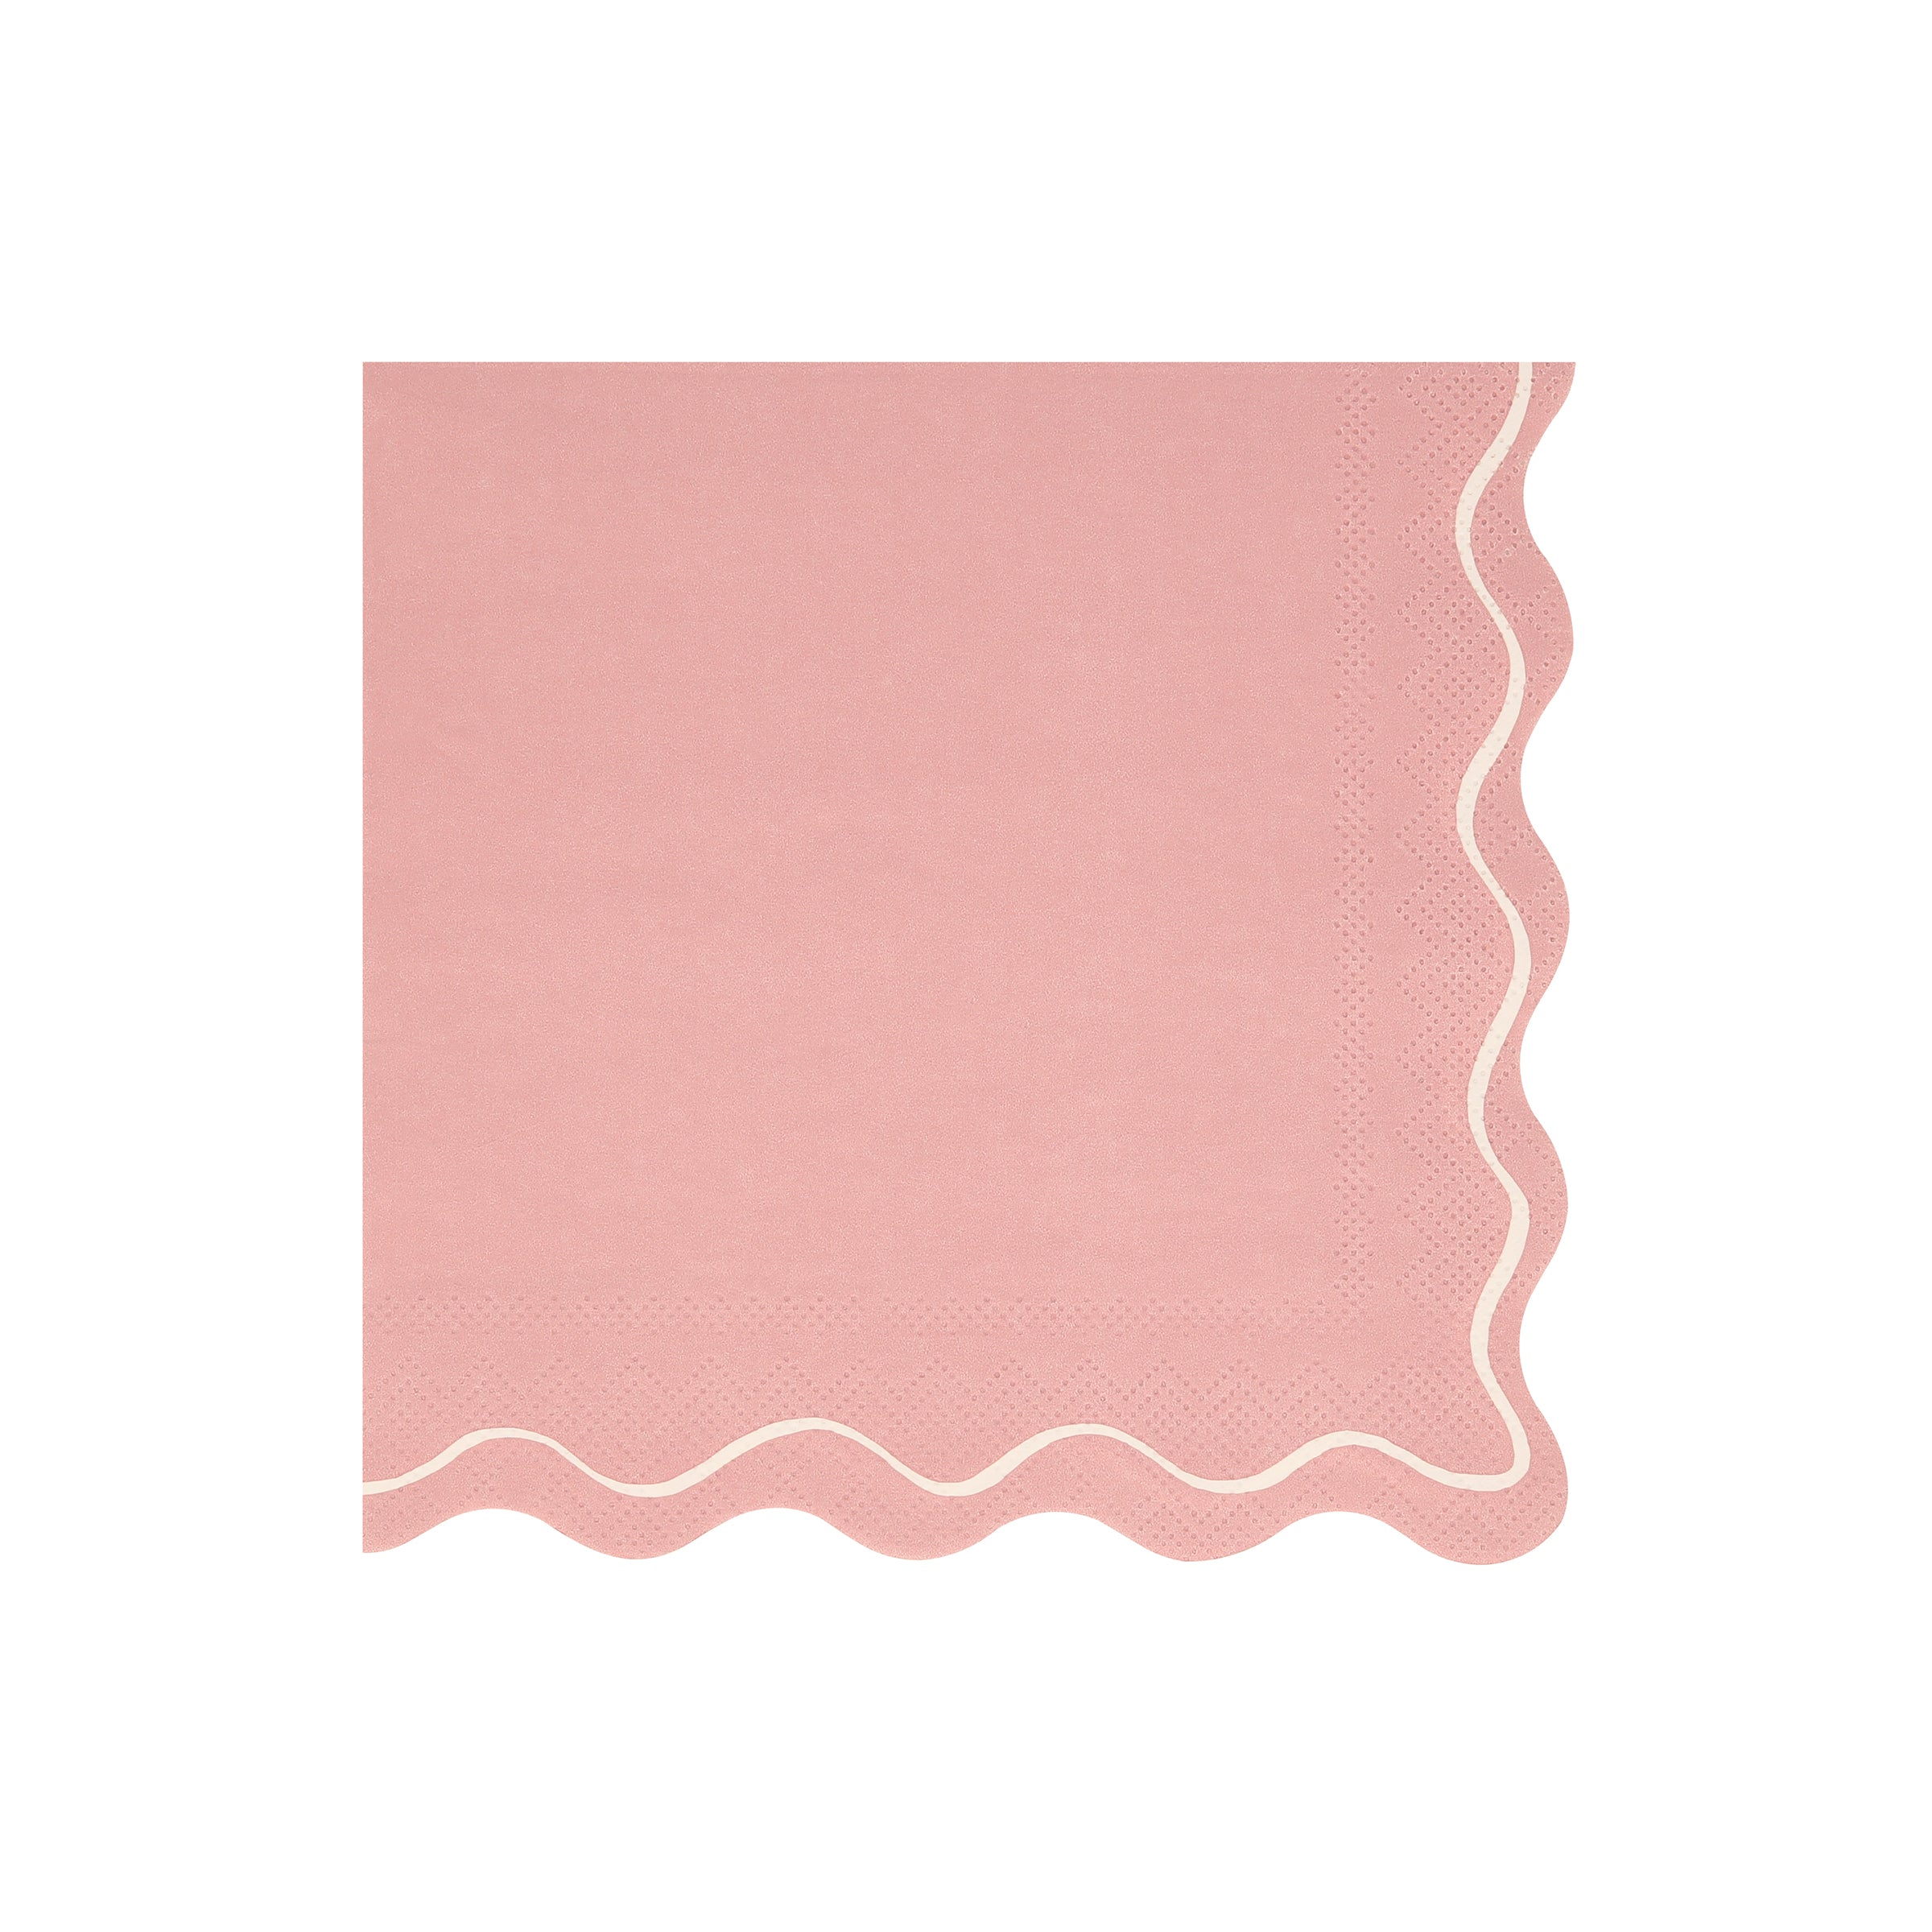 Our paper napkins have gorgeous colors, a scalloped edge and a wavy line design, the perfect party napkins.